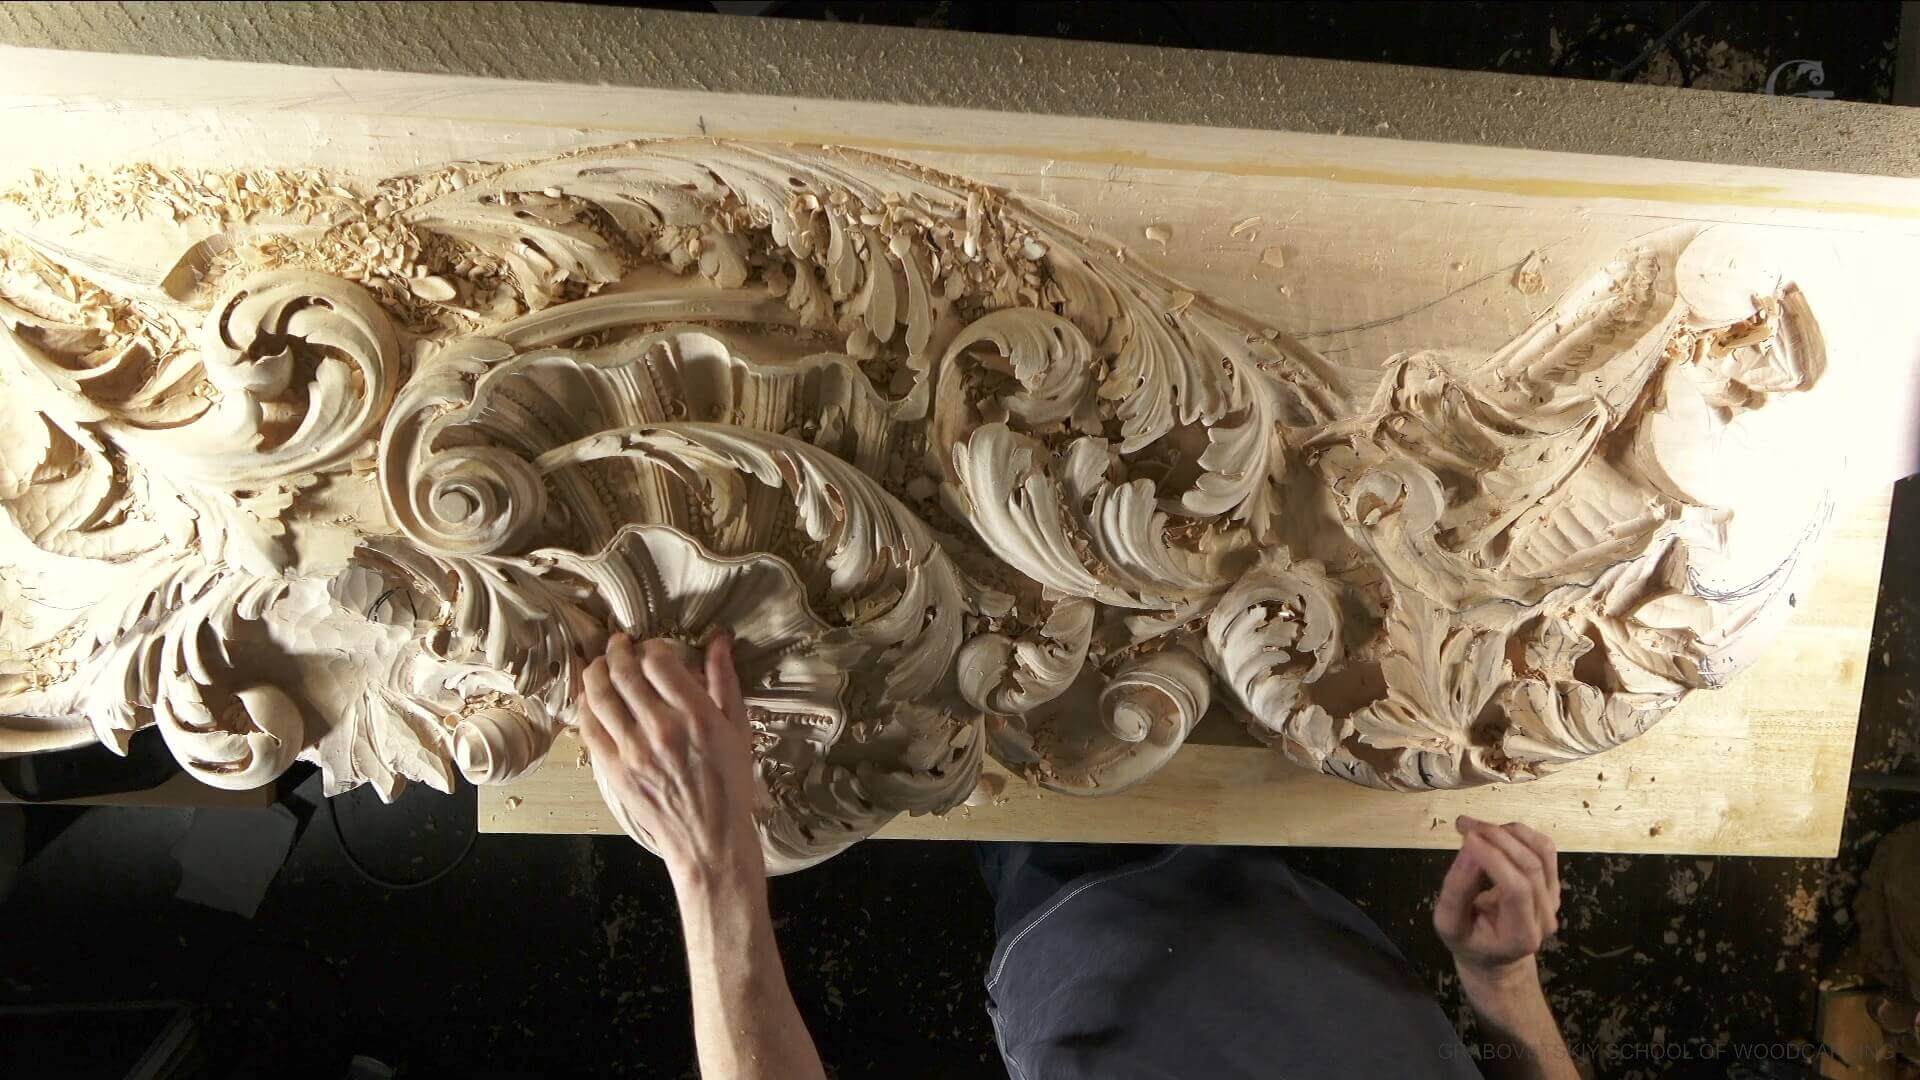 Is it possible to profit from your work of wood carving? 
Alexander Grabovetskiy is Carving a huge piece that starches wall to wall and going to the ceiling for a client. This piece is High baroque style of woodcarving and carved in Venetian tradition of 15th-16th century Venice. Learn how to carve wood with Wood Carving School! We are experts in woodcarving instruction, from beginner to advanced, and our courses cover everything from basic woodcarving techniques to advanced wood carving projects. Find out if it is possible to make money carving wood with the help of our woodcarving courses.  